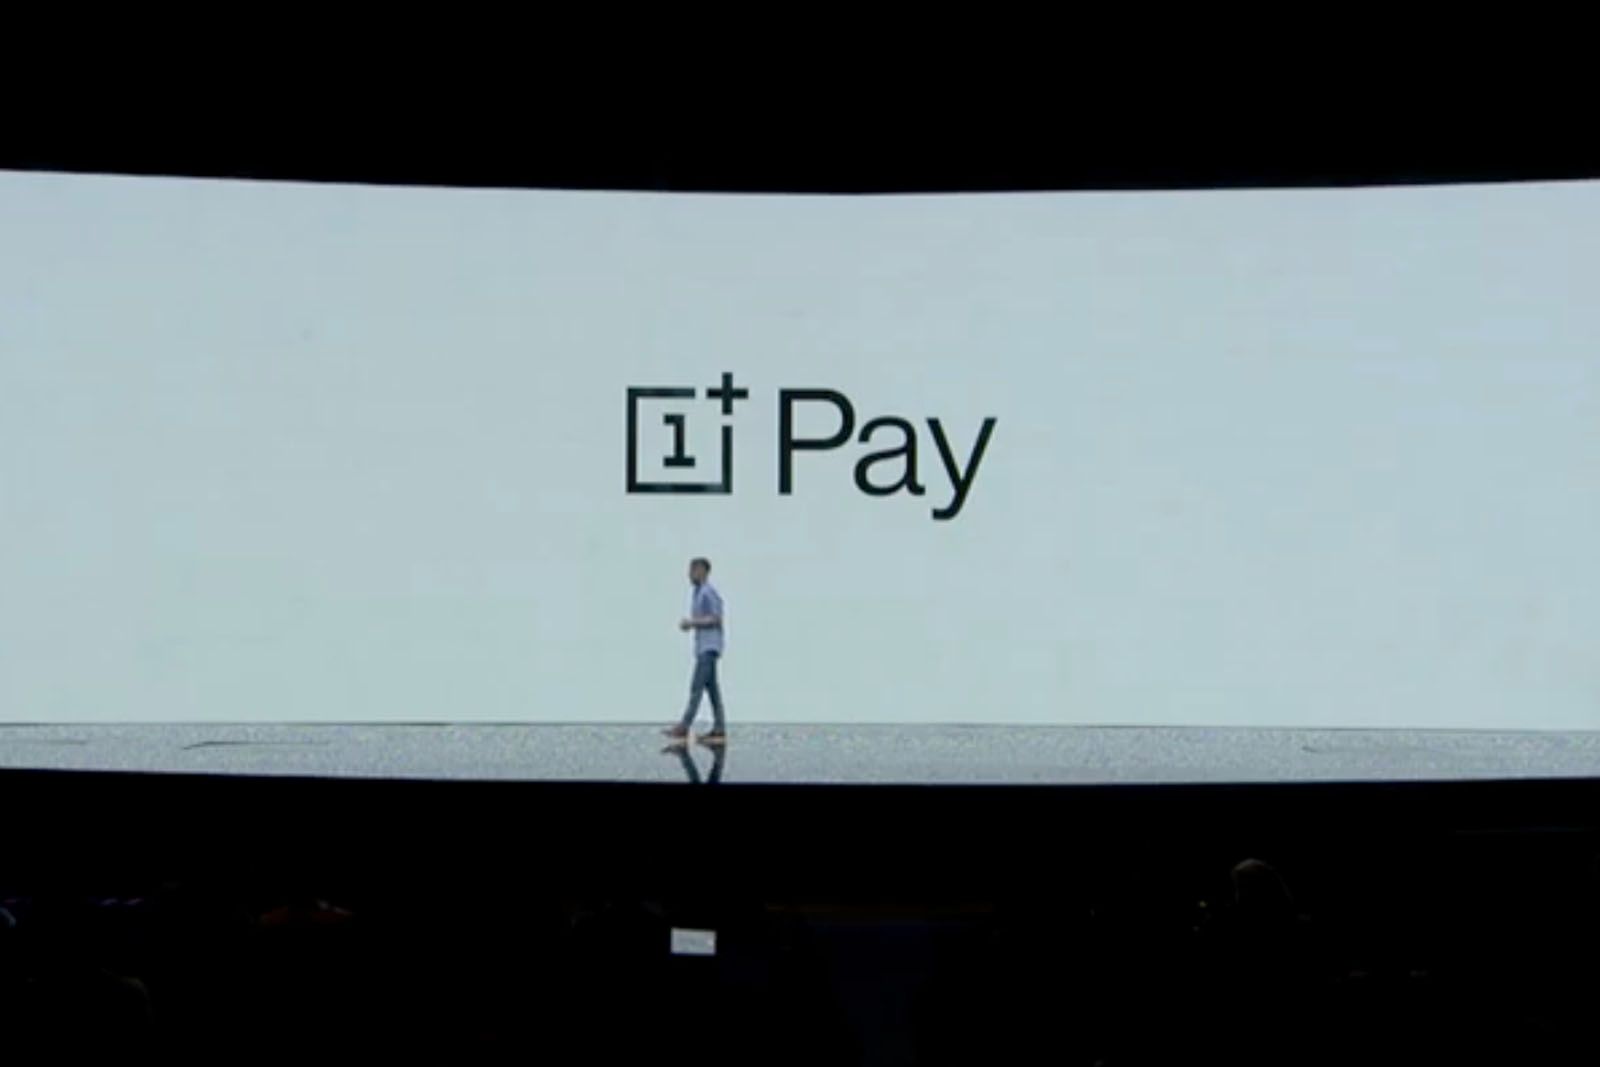 OnePlus Pay will launch next year competing with Google Pay and Apple Pay image 1